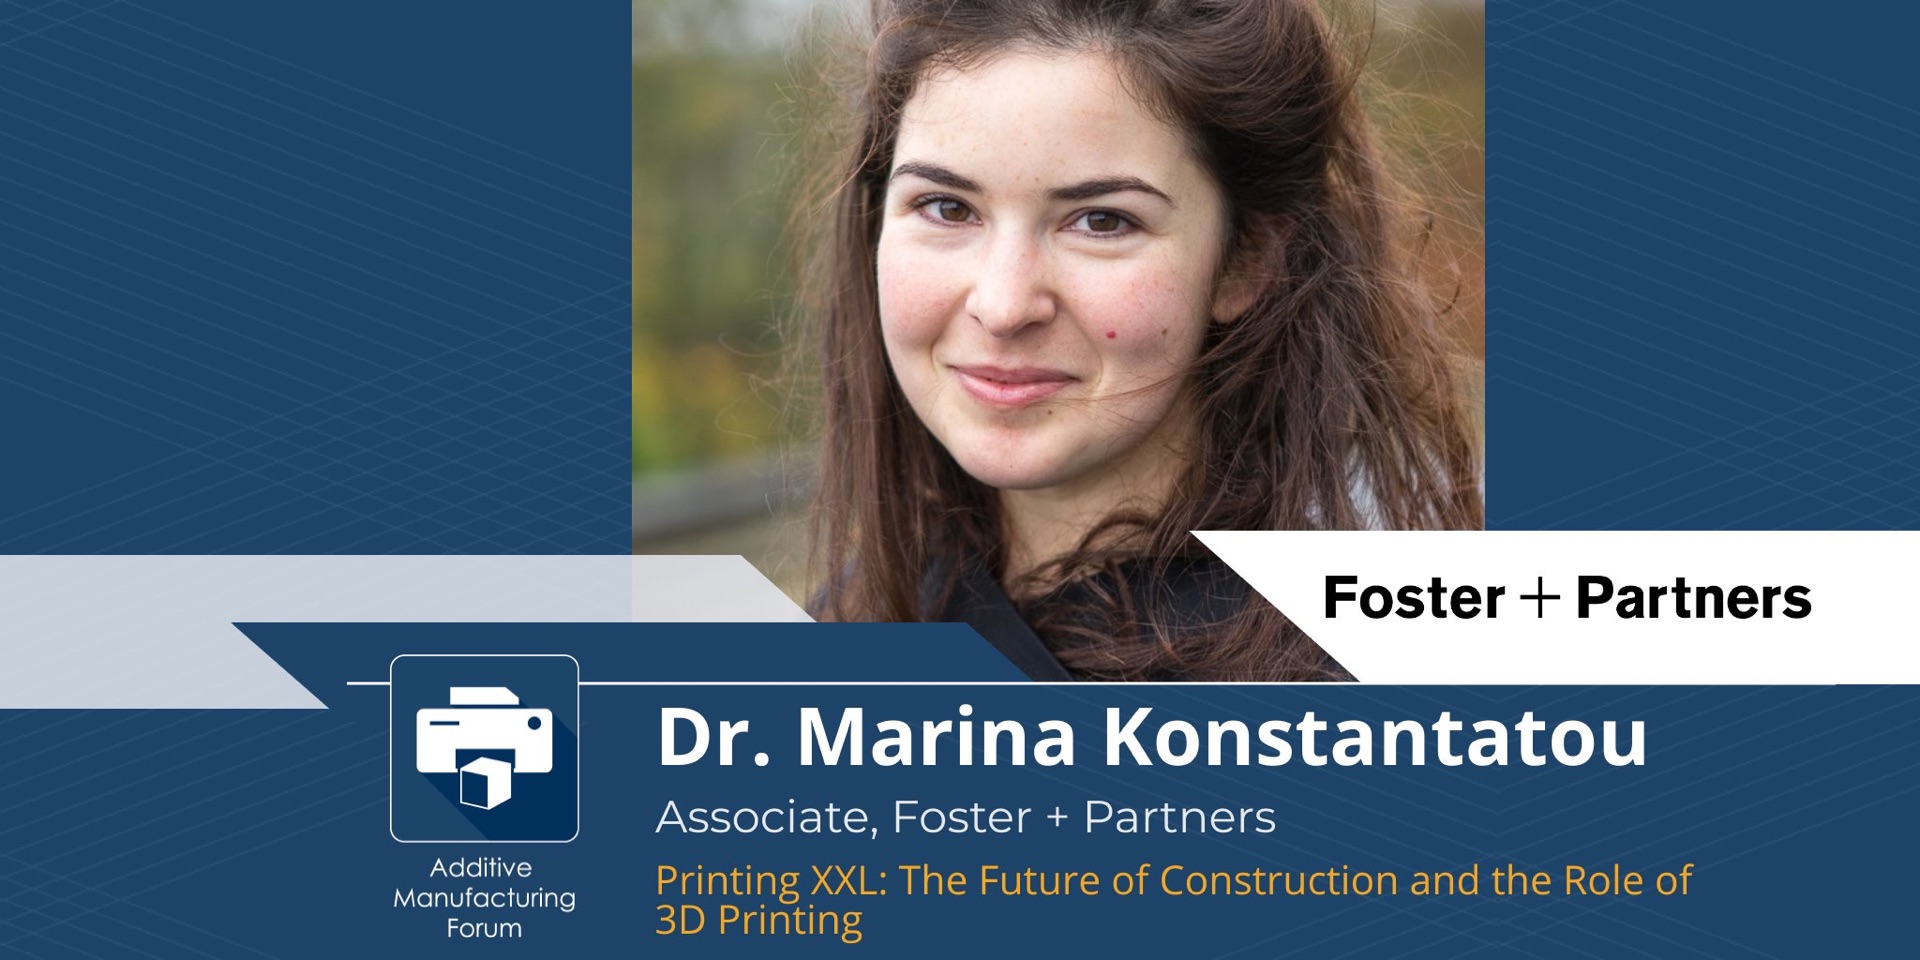 Dr Marina Konstanatou specialises on projects and research grants focusing on structural design, additive manufacture, architectural geometry, off-Earth structures, and robotics